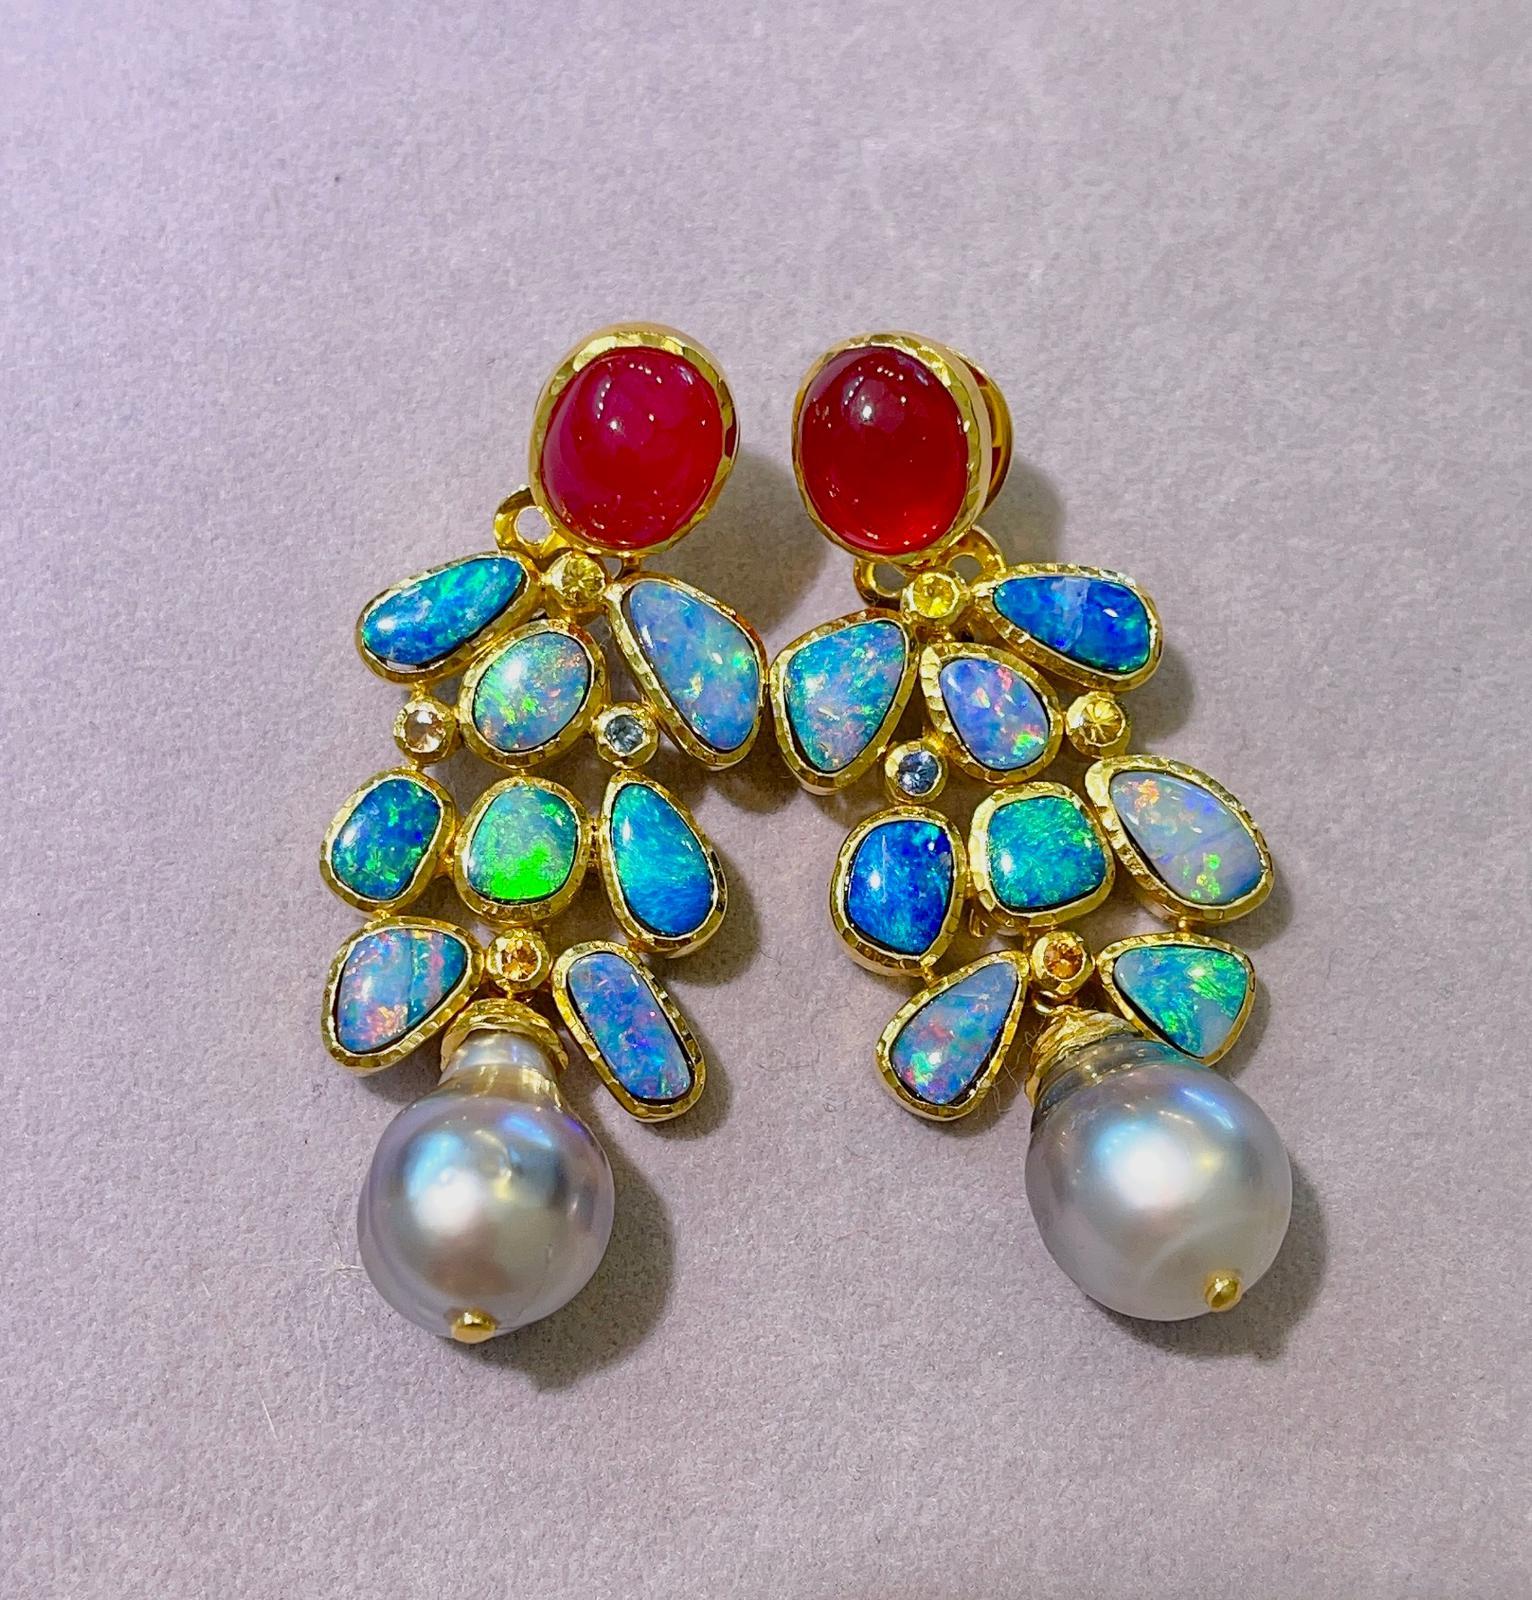 Bochic “Capri”, Ruby, Blue Opal and Tahiti Pearls Earrings set in 22 Gold & Silver 
Natural Red Ruby Cabochons - 13 carats
Shape - Oval shape Cabochon
Baroque Tahiti south sea pearls, silver color with pink tone 
White color, with pink and silver